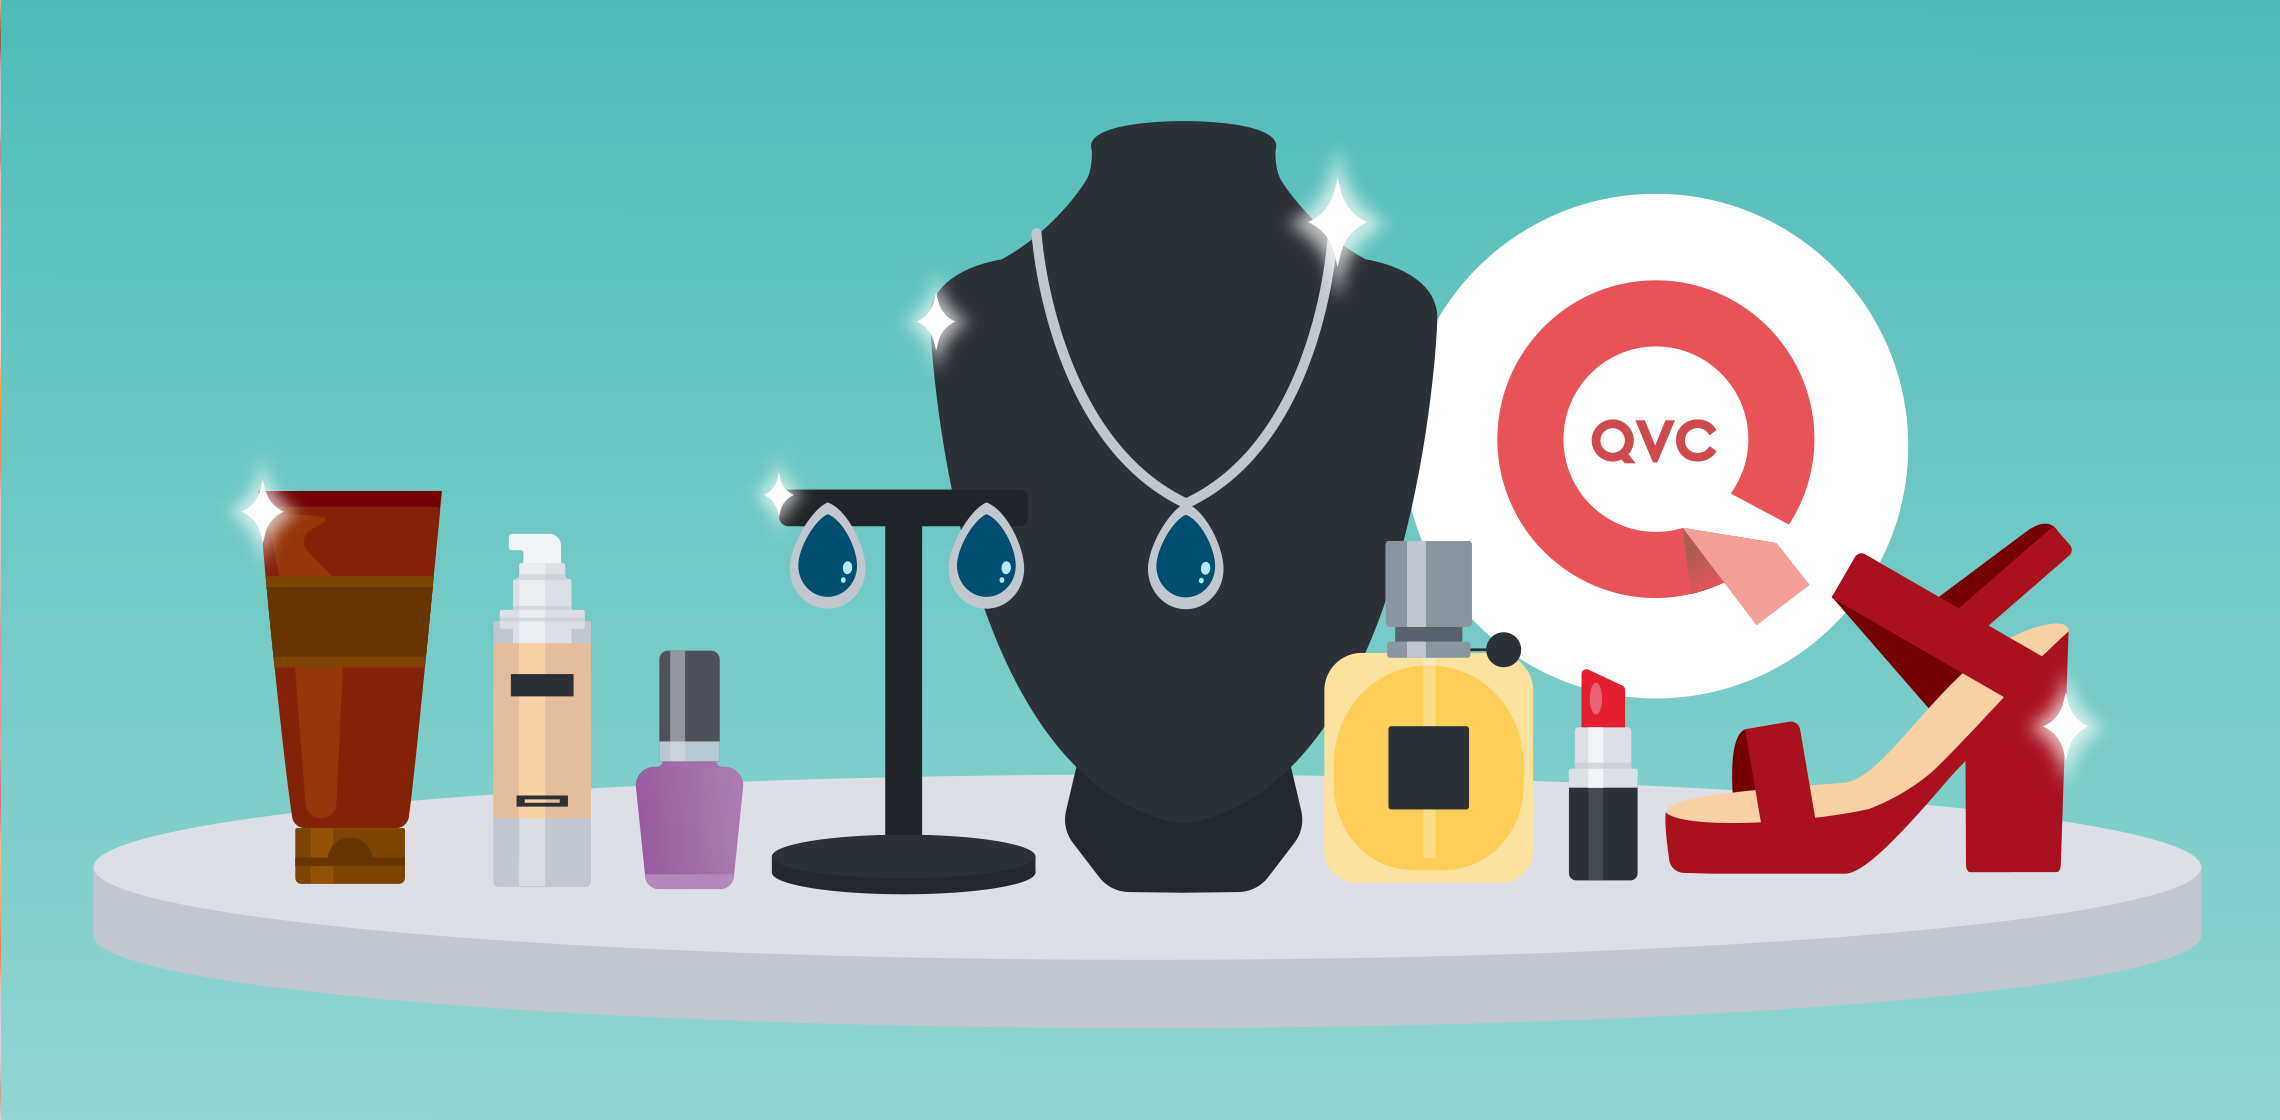 5 Benefits of Shopping with QVC